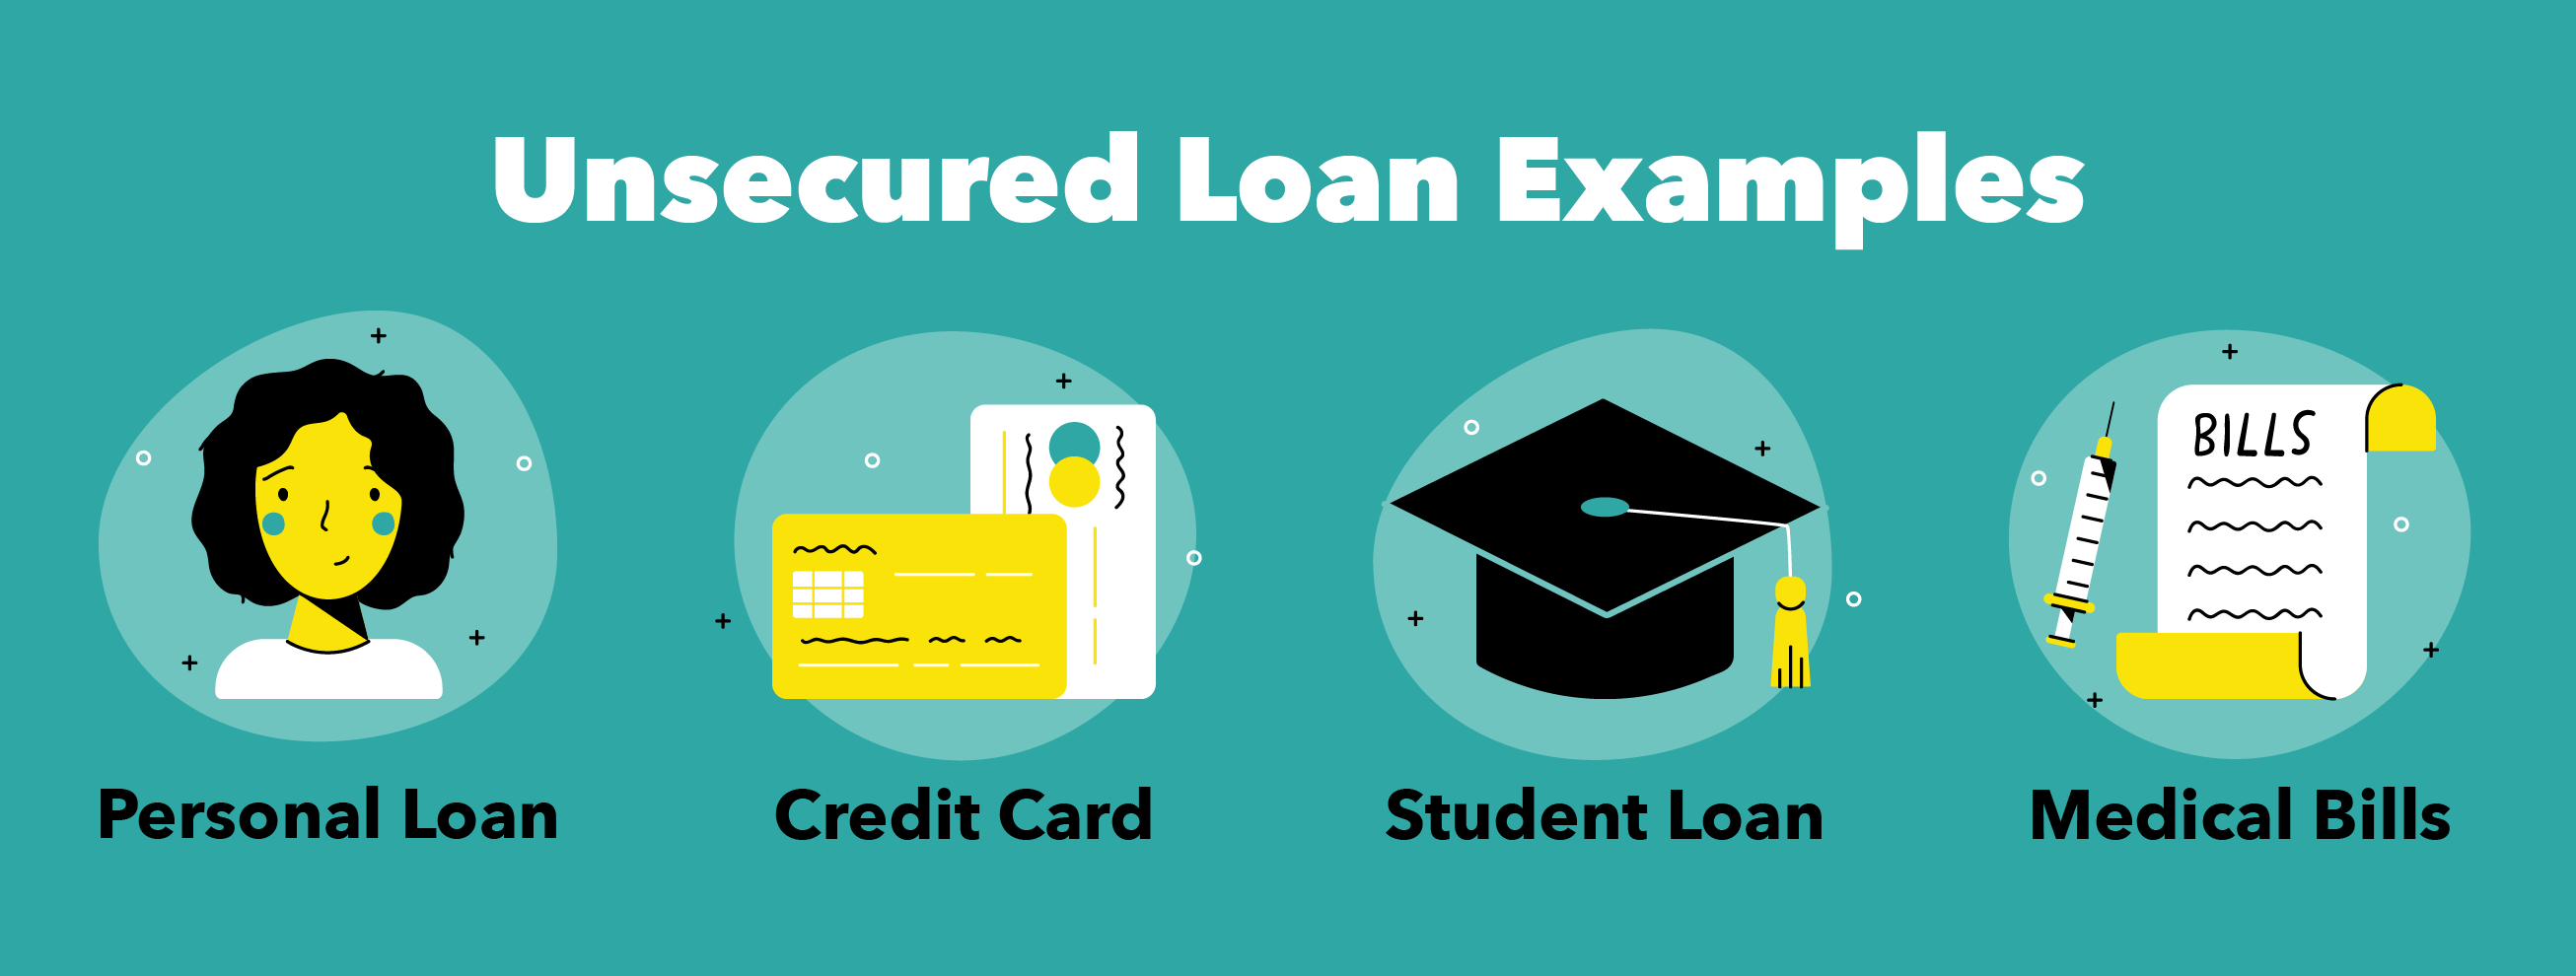 Unsecured Loan Examples